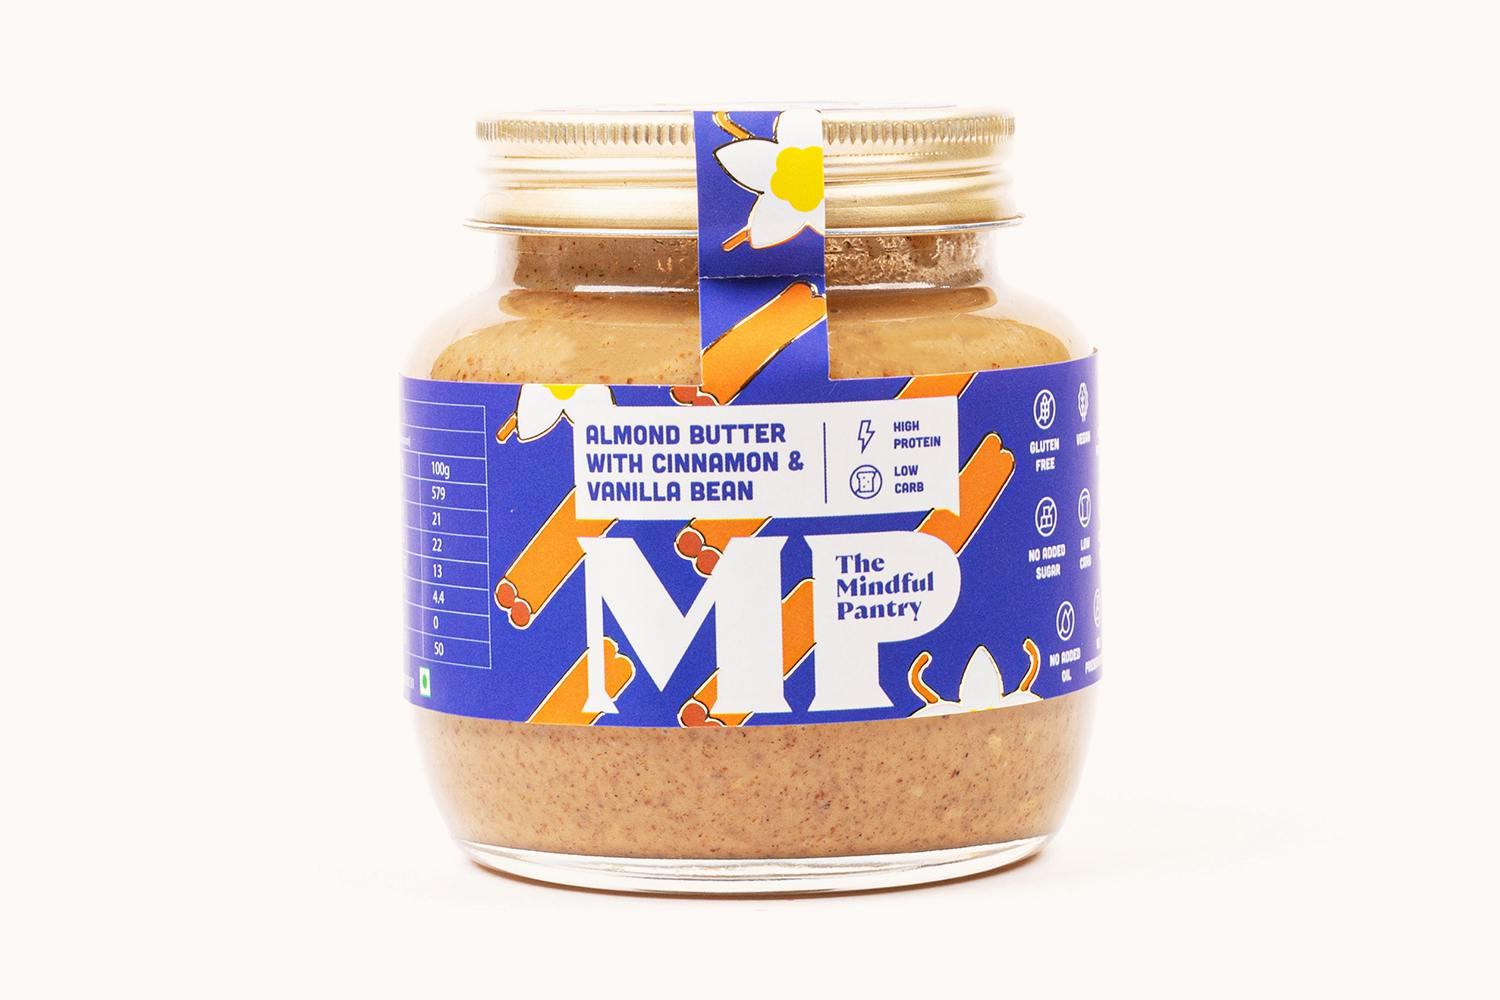 The Mindful Pantry Almond Butter with Cinnamon & Vanilla Bean